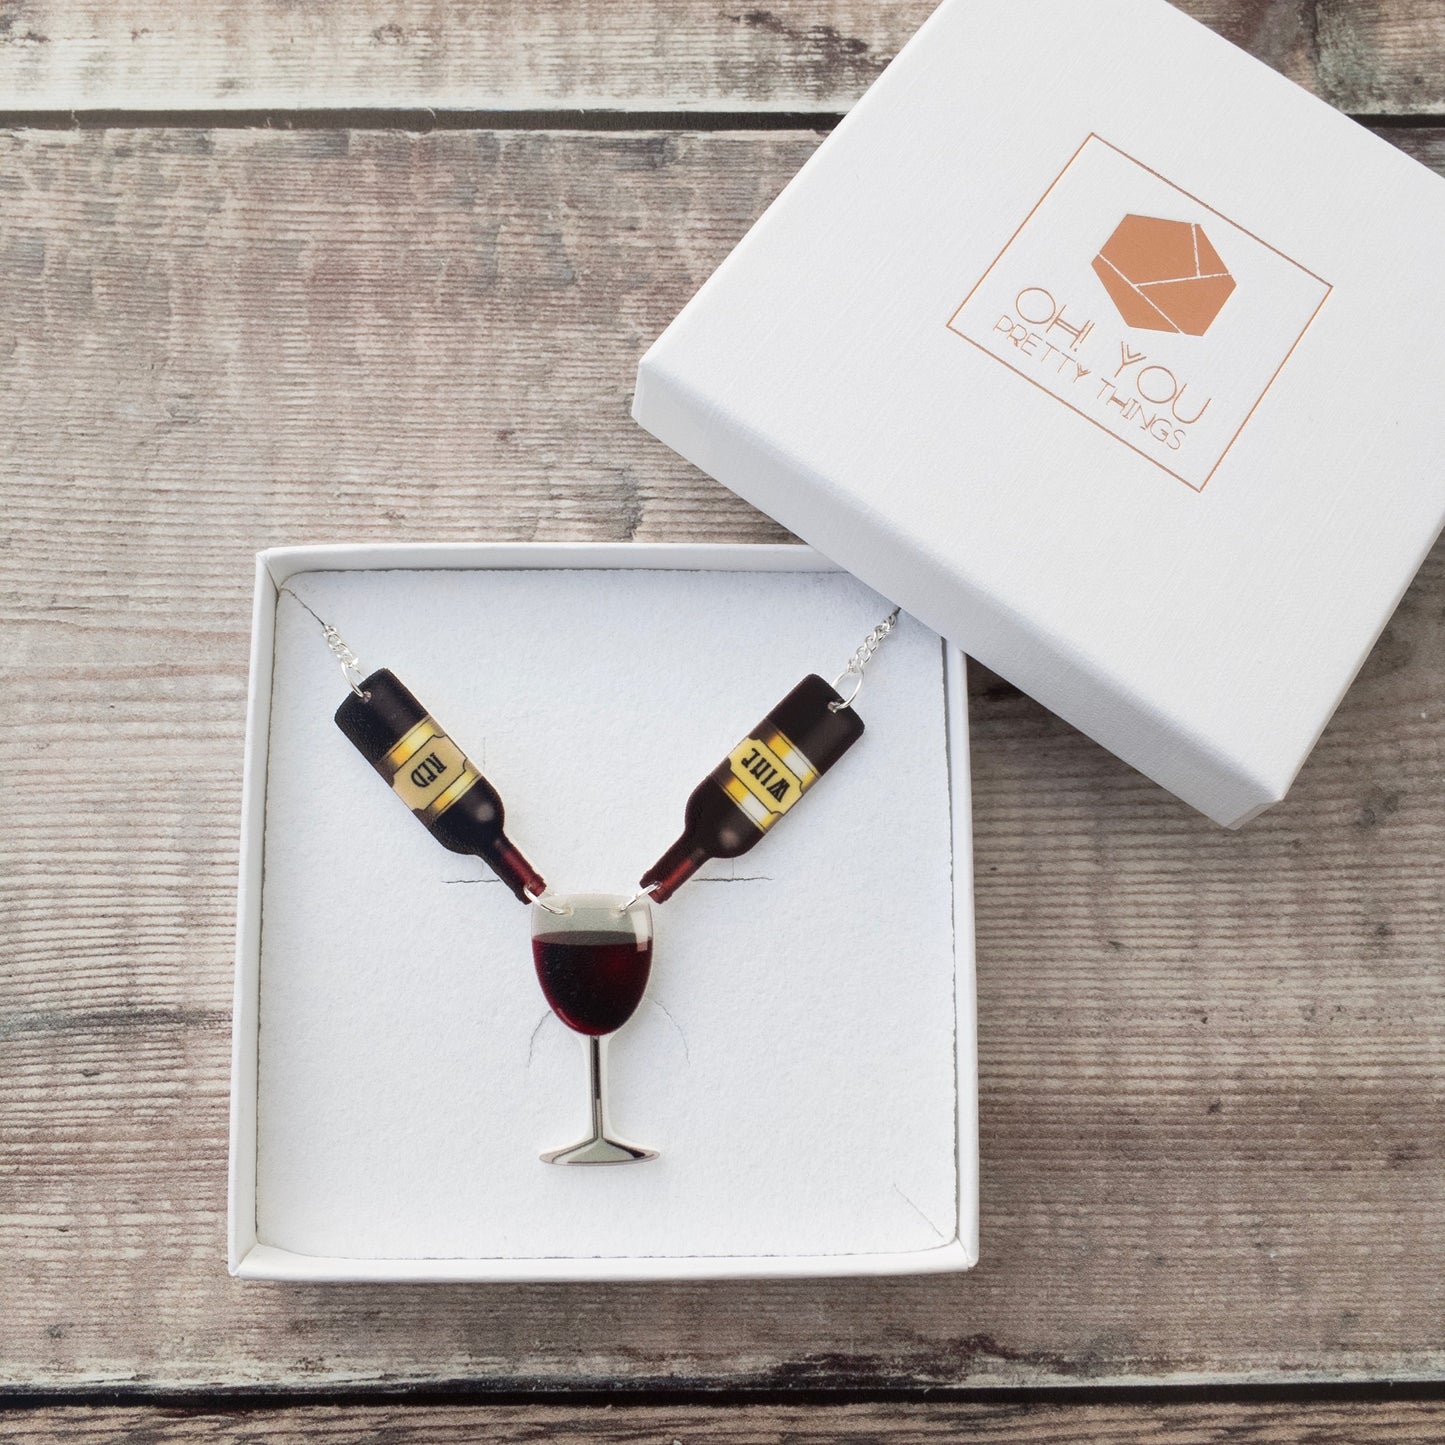 Red wine necklace - Wine lover gift